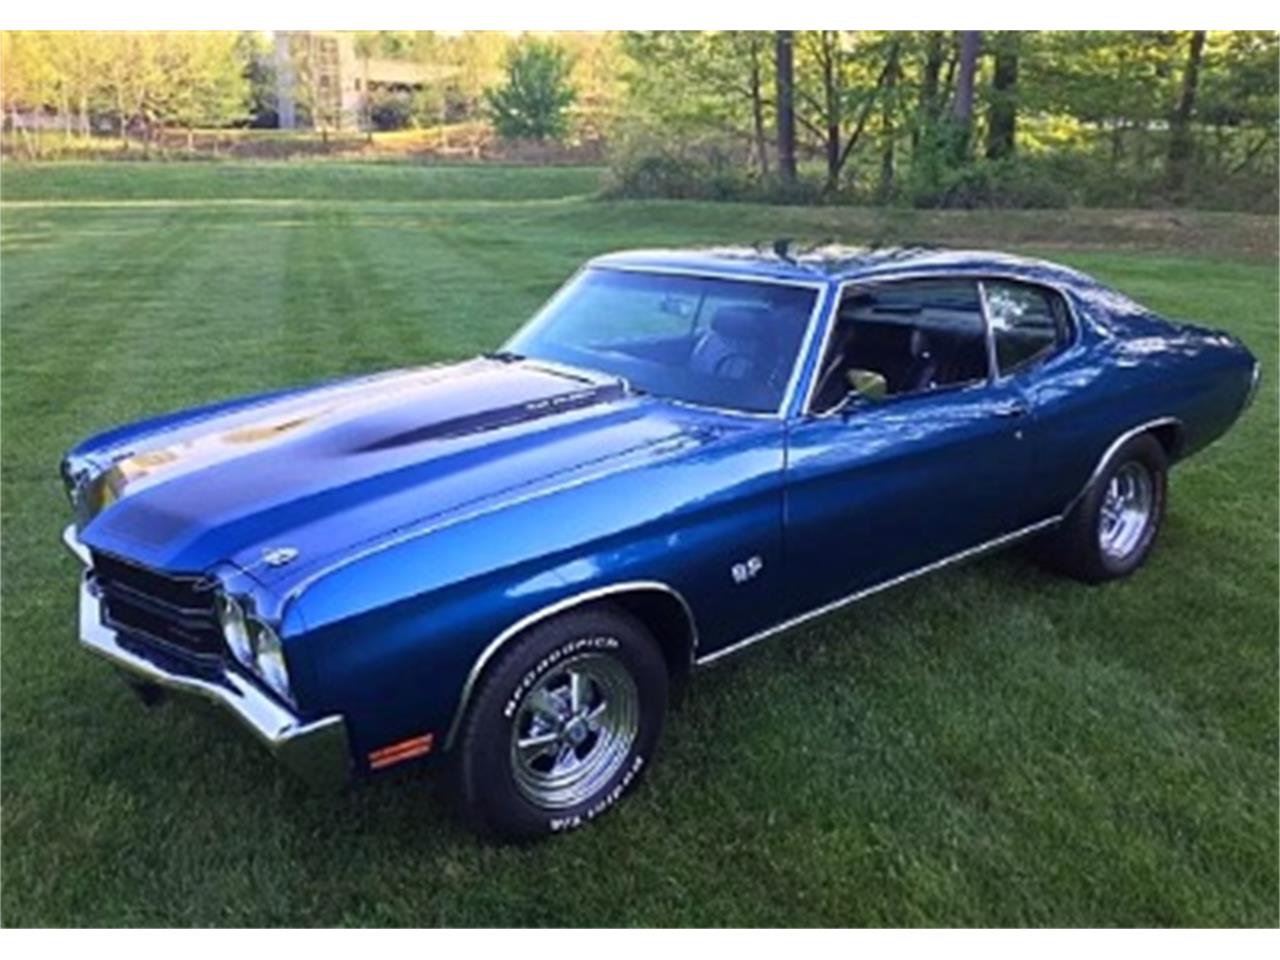 1970 Chevy Chevelle Ss396 In Fathom Blue